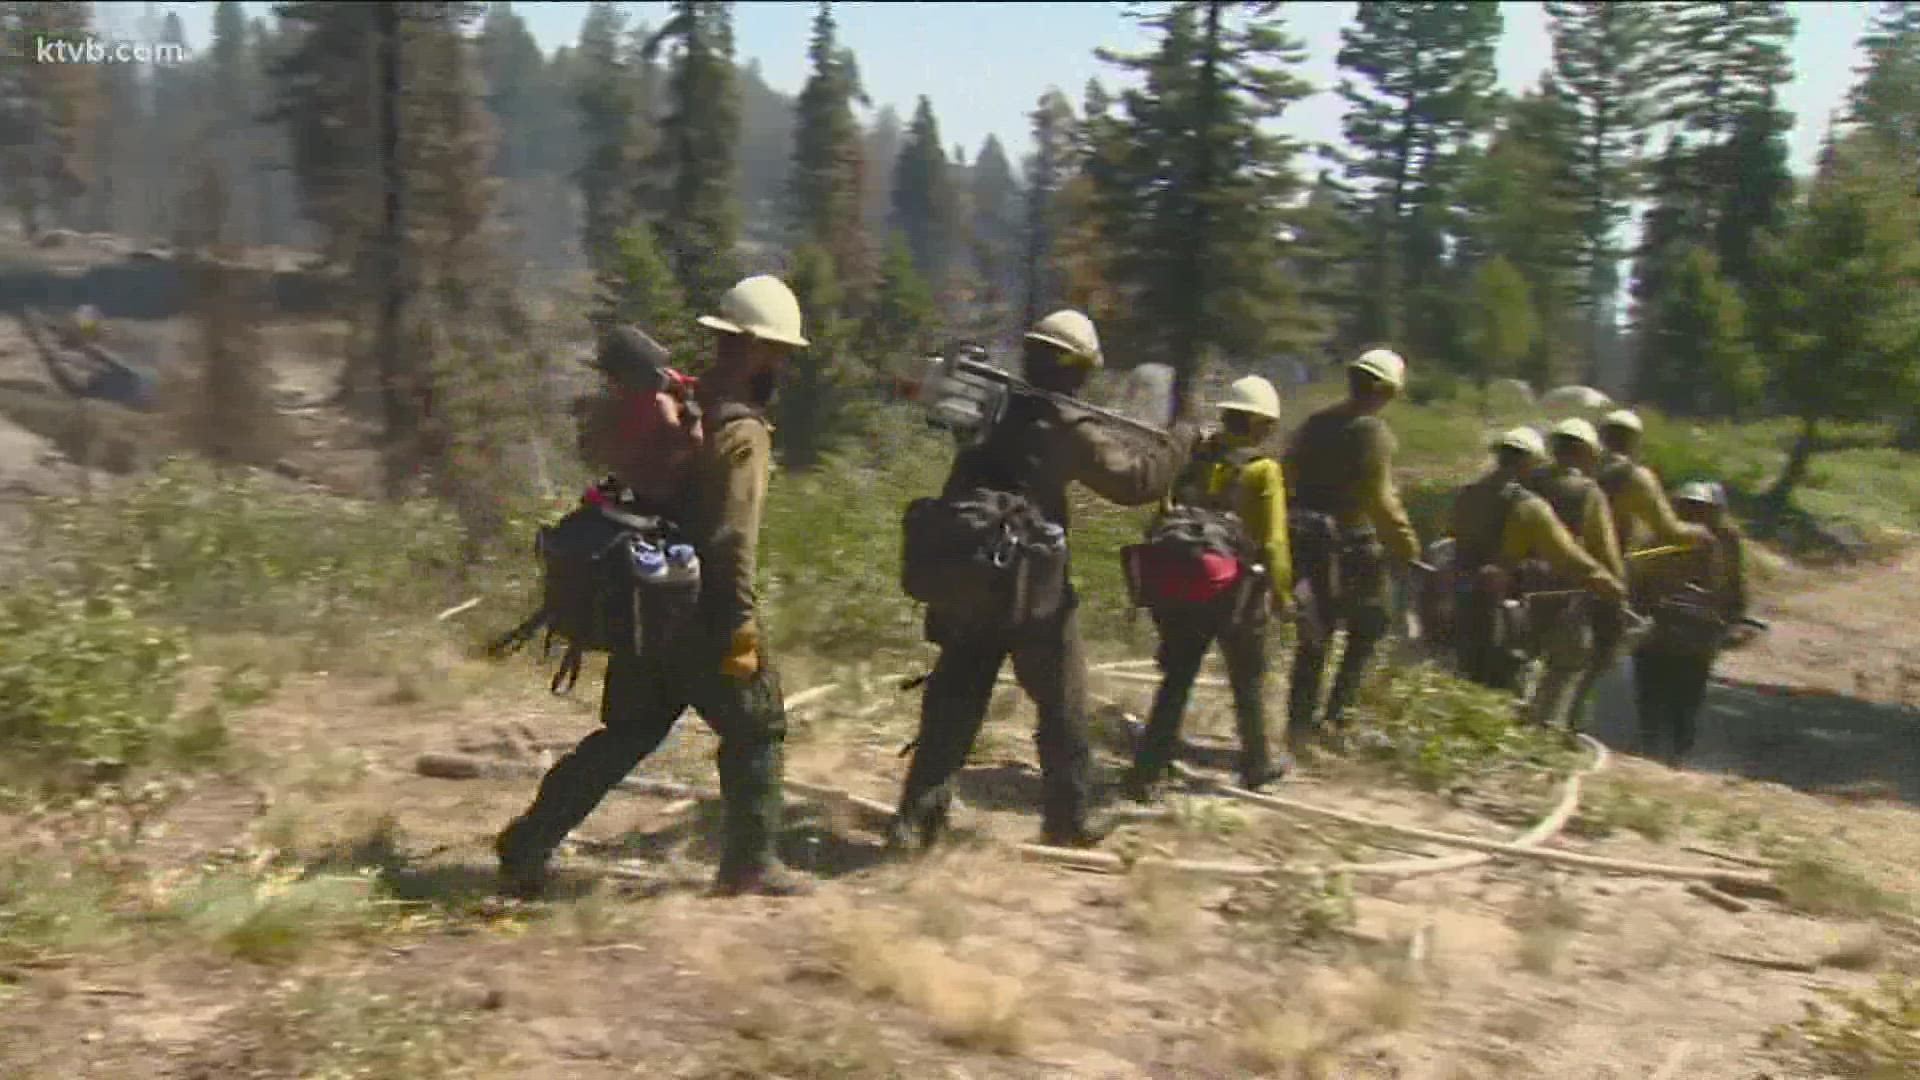 House Bill 588 passed the state and house and senate. It would pay wildland firefighters 25% above their hourly wage while working at an active fire.